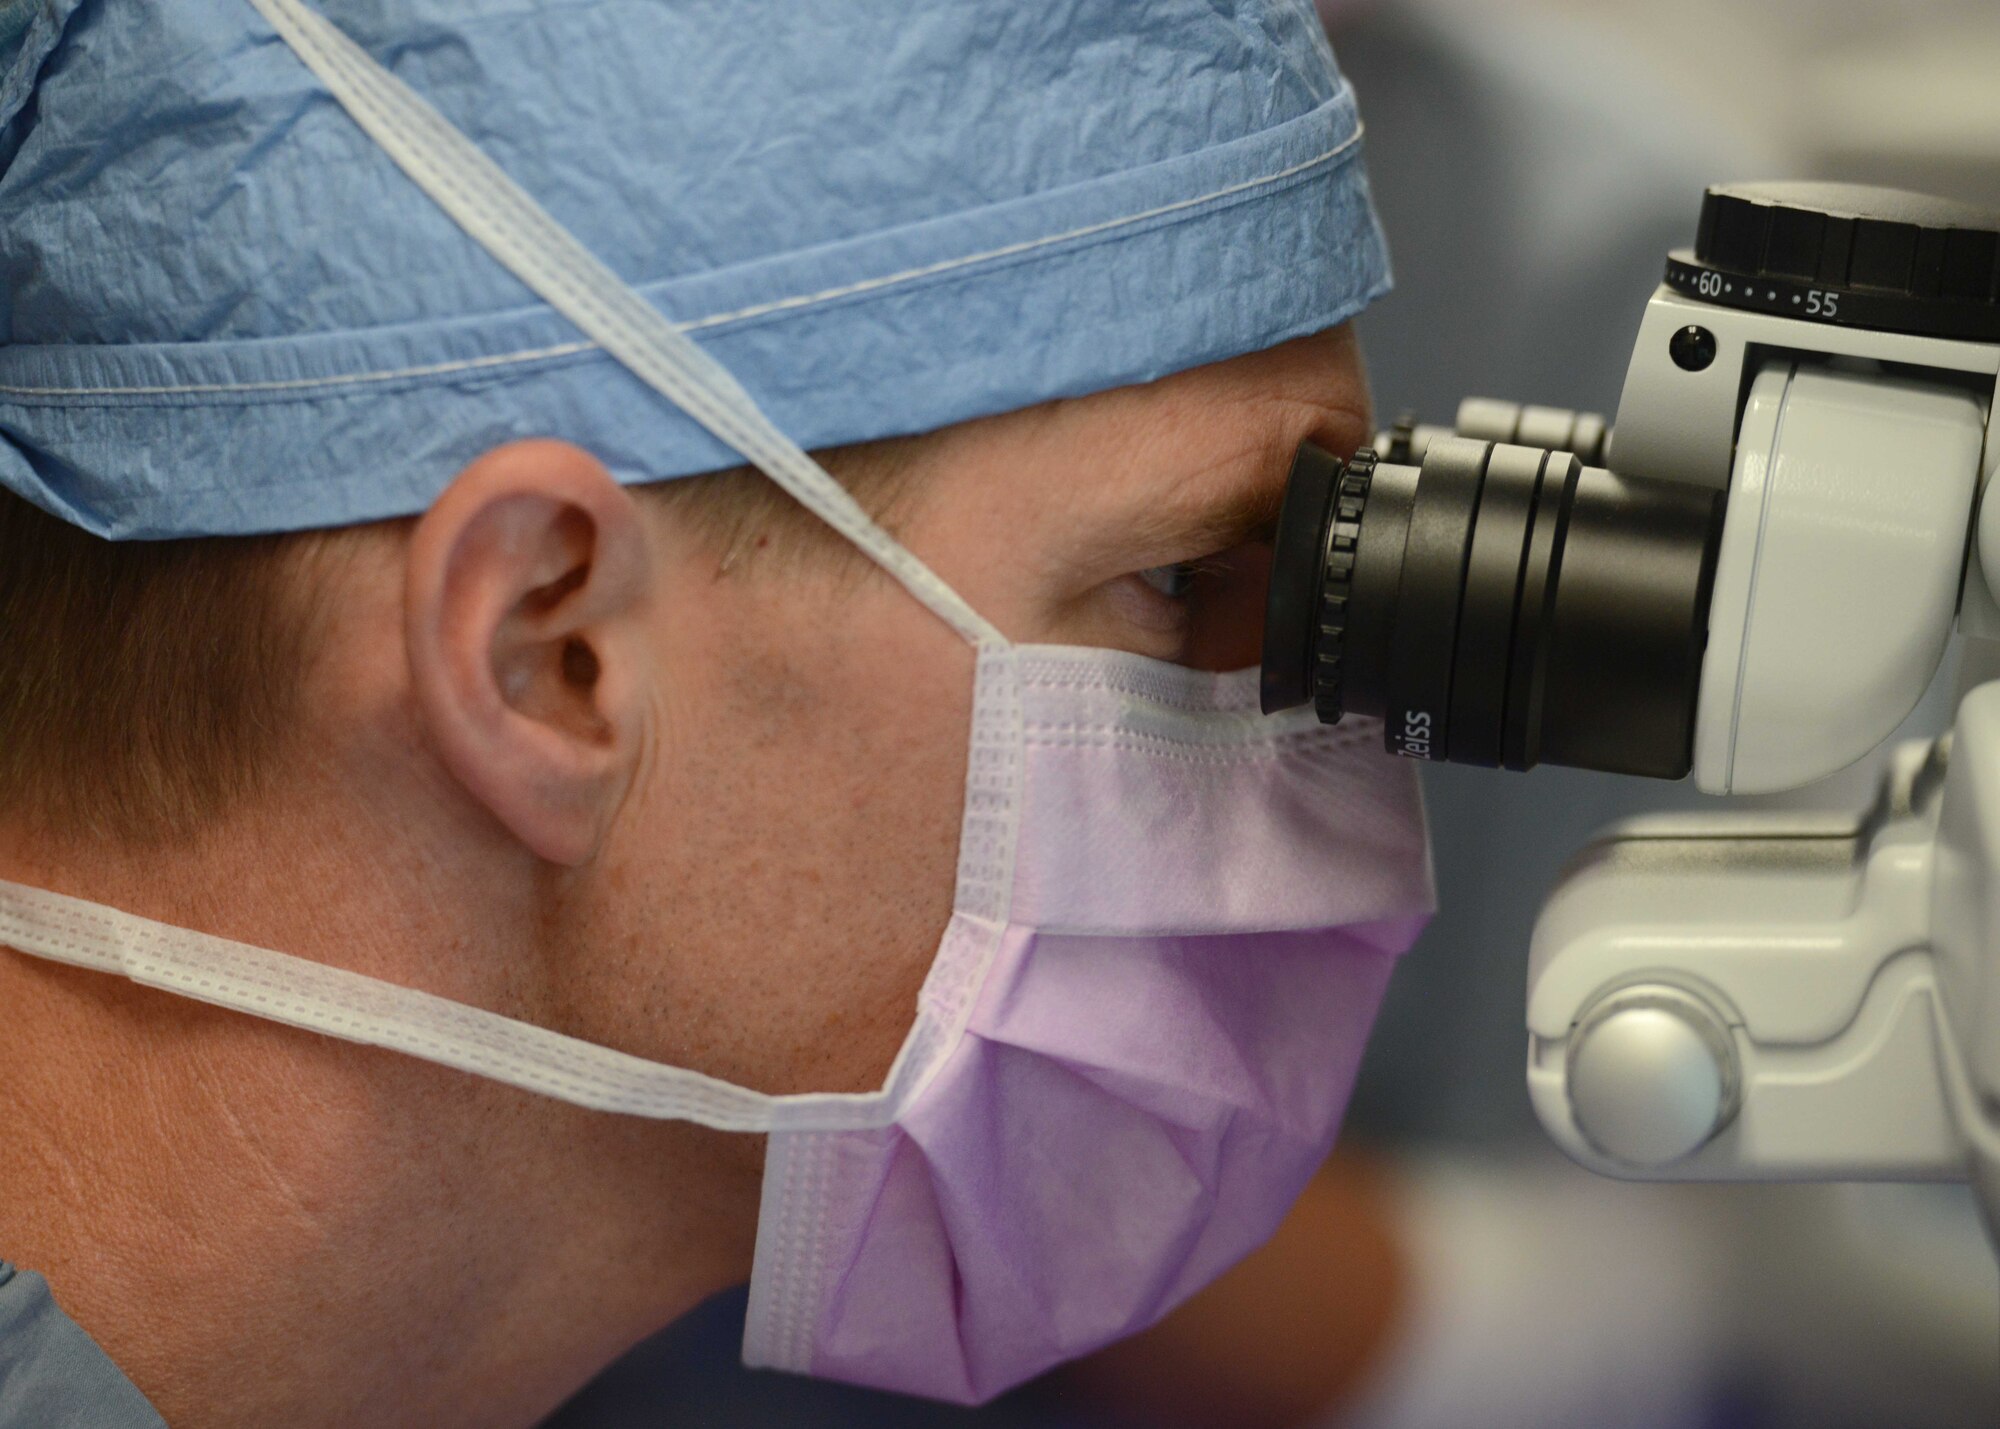 Lt. Col. Marcus Neuffer, chief surgeon assigned to the 10th Medical Group, Air Force Academy, Colo., looks through a microscope during a small incisional lenticular extraction (SMILE) eye surgery, Aug. 19, 2021.